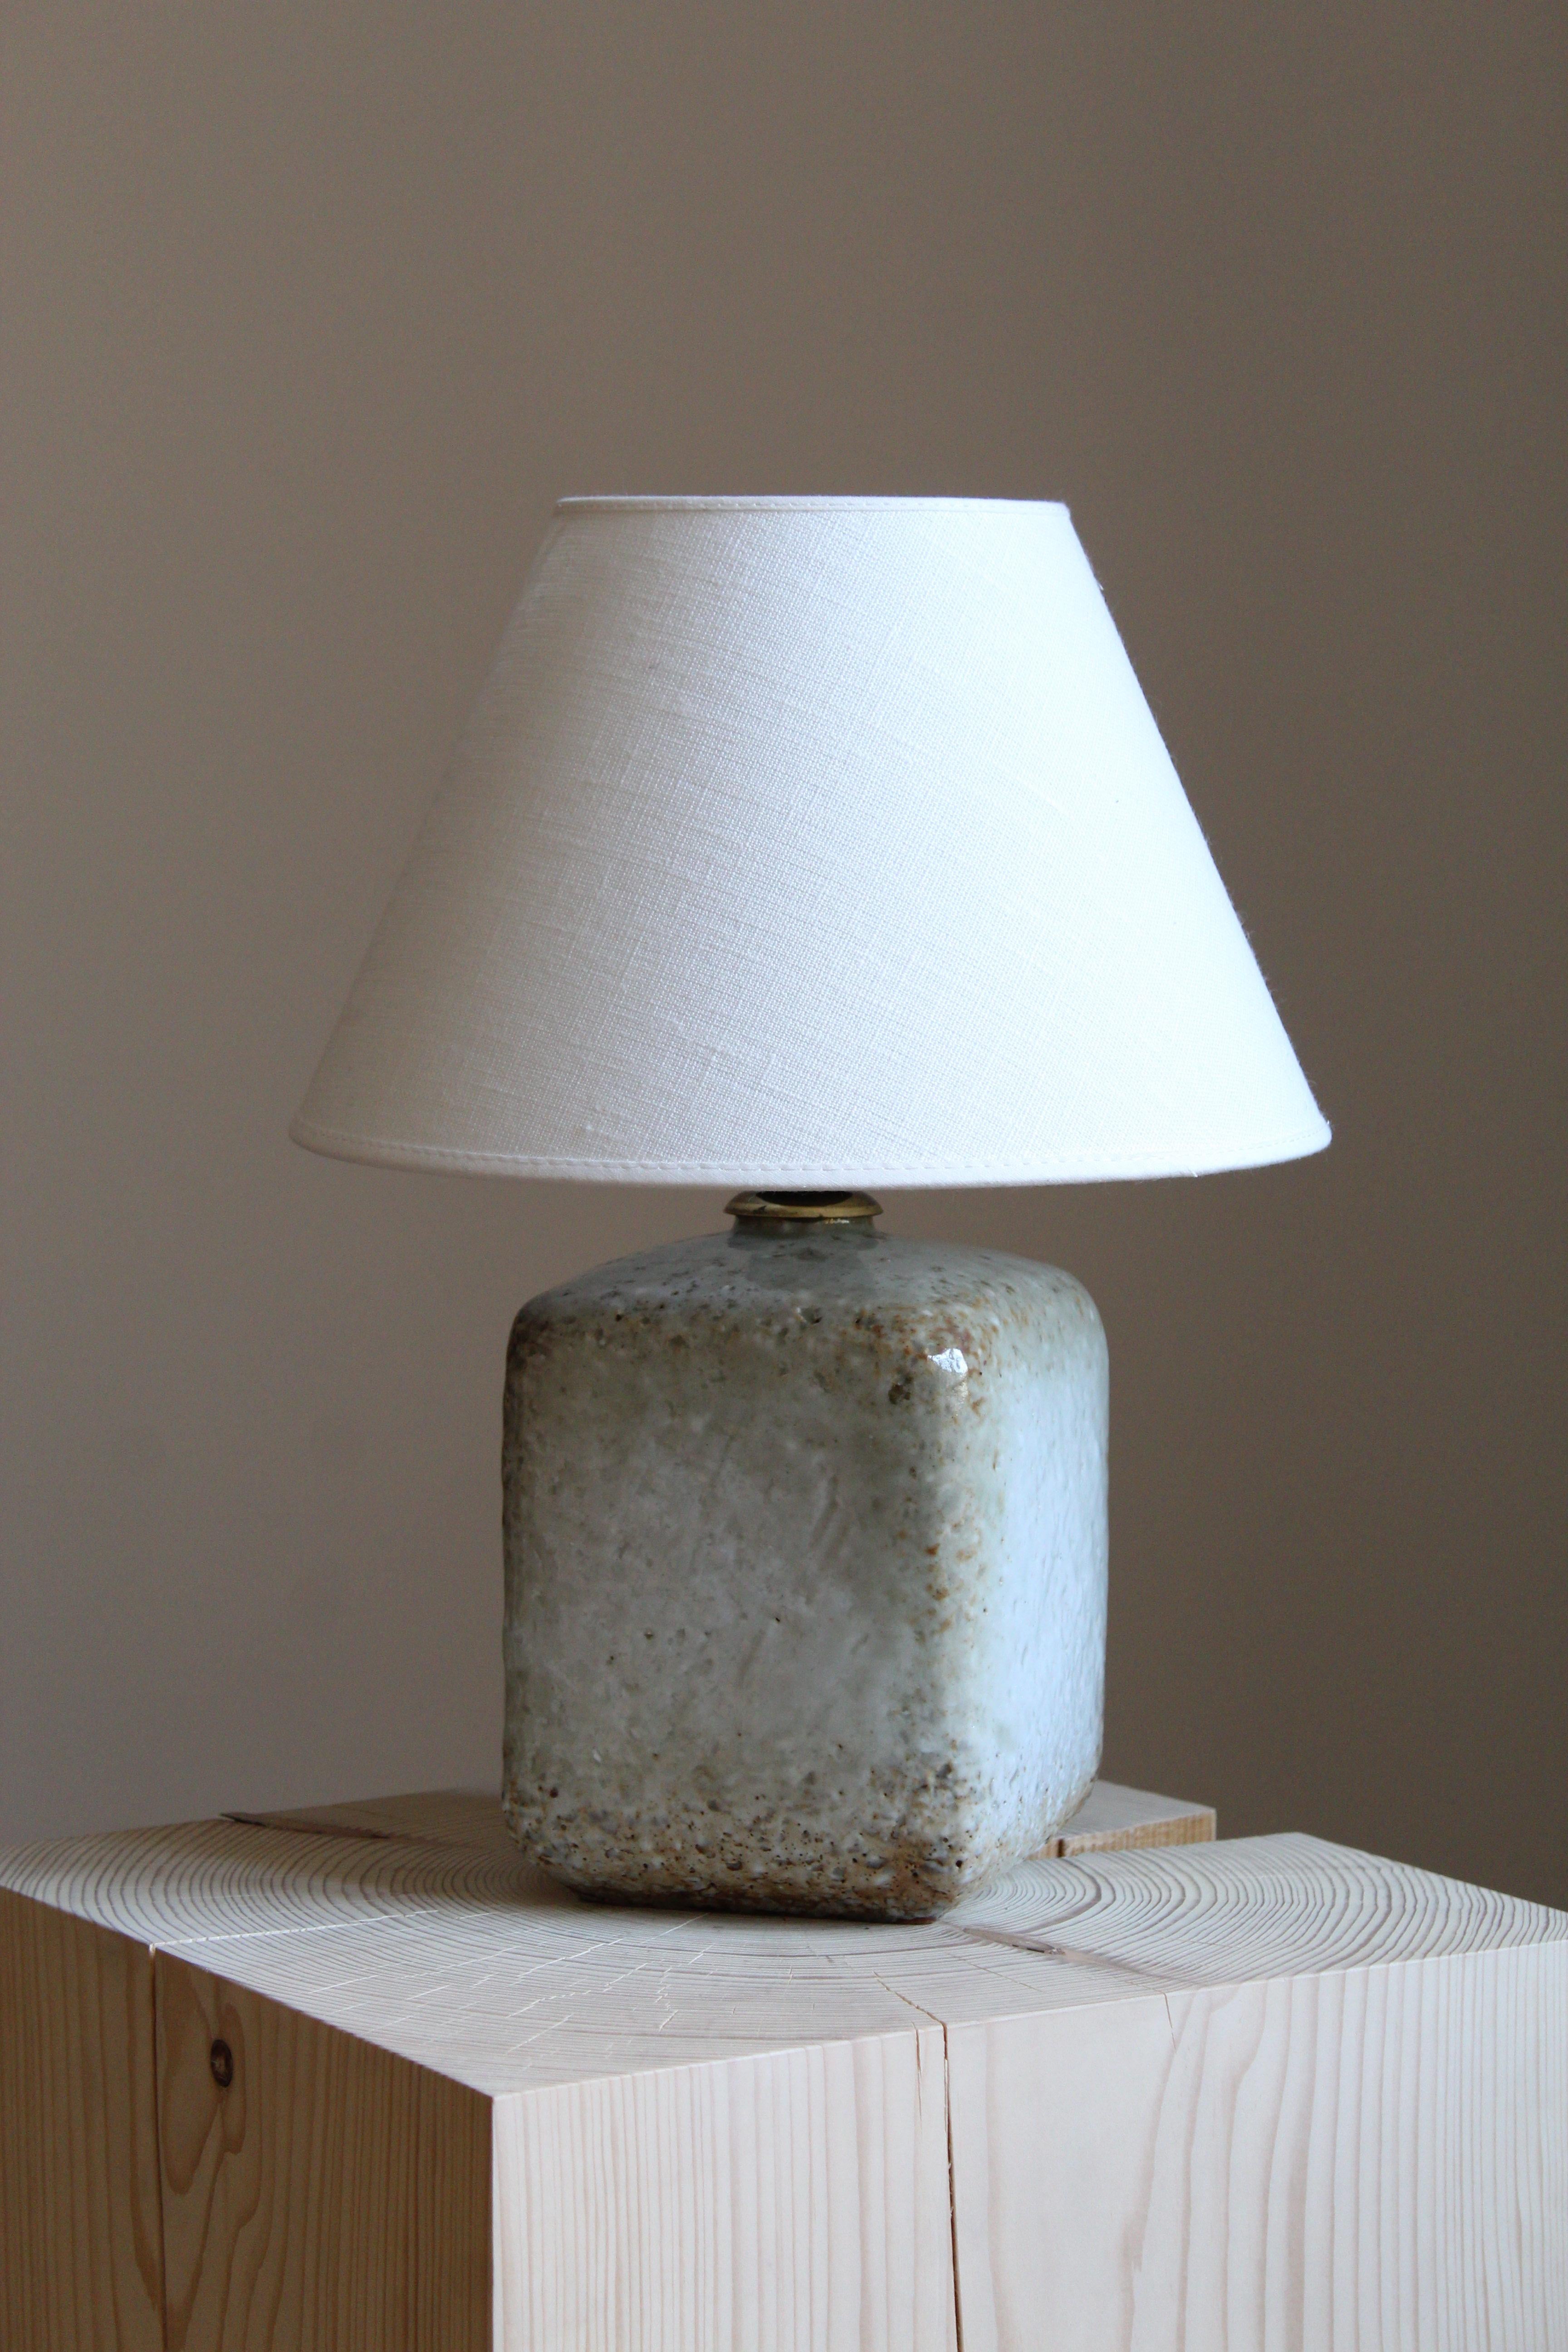 A table lamp produced by Rörstrand, Sweden, 1950s. Designed by Gunnar Nylund, (Swedish, 1914-1997). Signed. With brand new lampshade.

Nylund served as artistic director at Rörstrand, where he worked, 1931-1955. Prior to his work at Rörstrand he